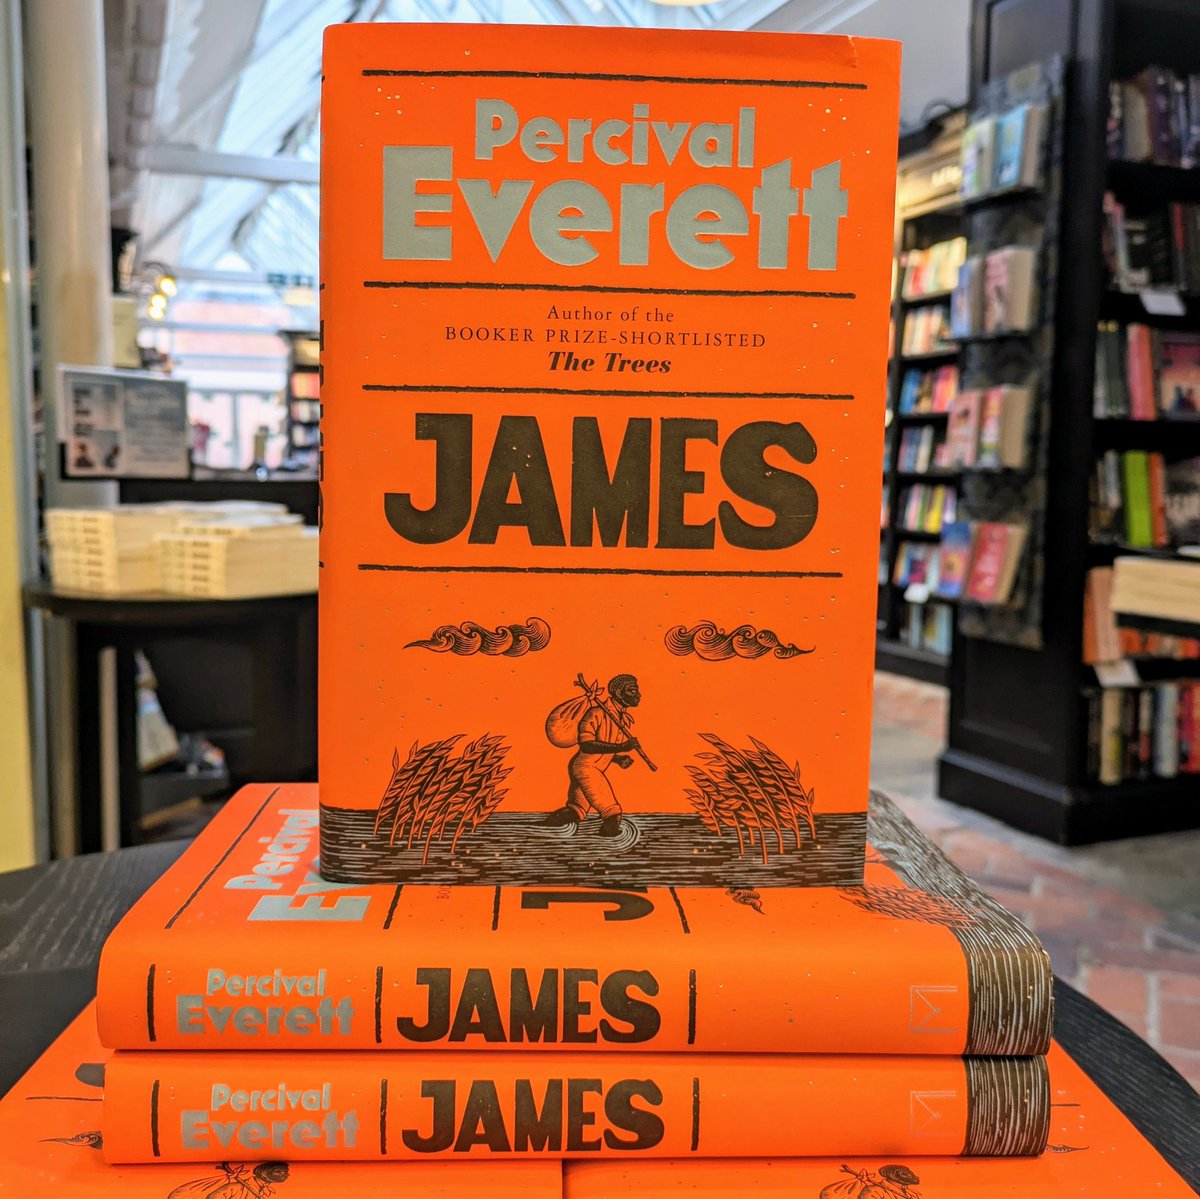 A breathtakingly accomplished retelling of 'The Adventures Of Huckleberry Finn' from the point of view of the enslaved Jim, Percival Everett's novel reclaims the character's voice from the literary margins with power, precision, and dazzling wit. #waterstones #percivaleverett